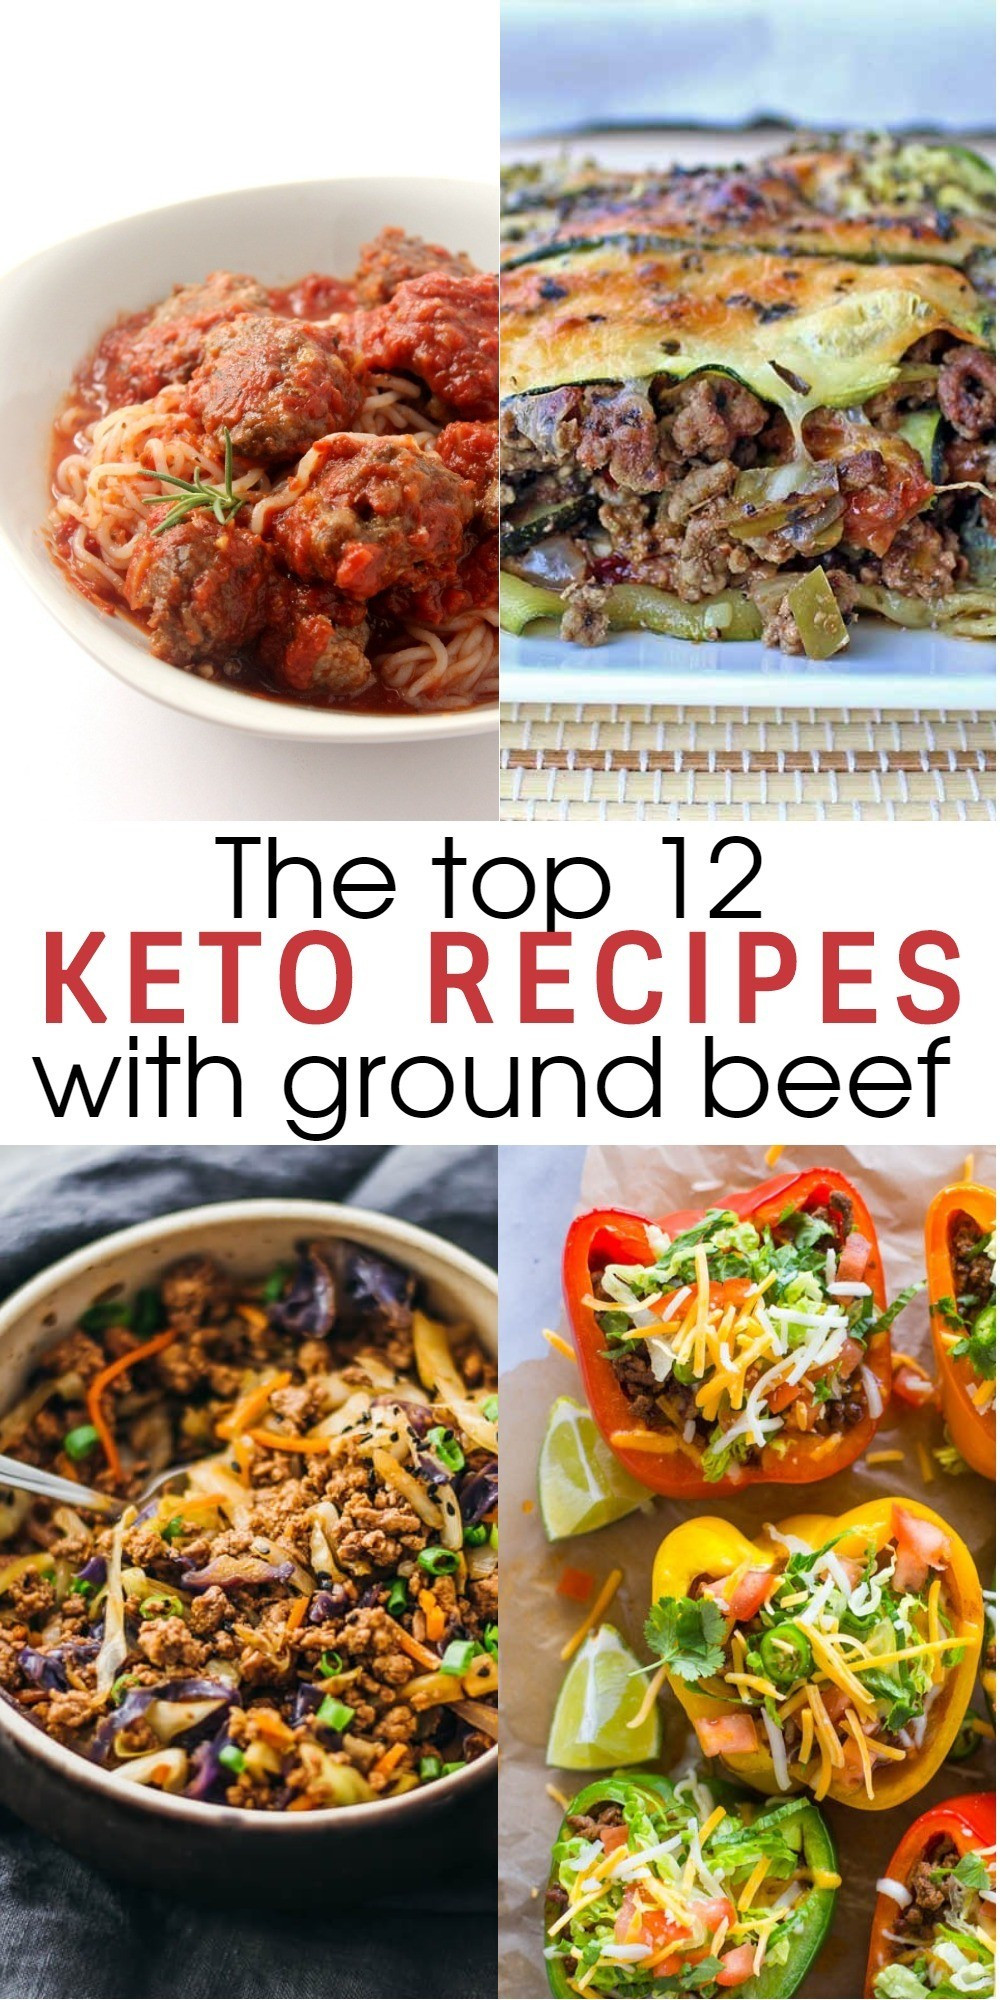 Keto Diet Recipes Dinners Easy
 12 Flavorful and Easy Keto Recipes With Ground Beef To Try